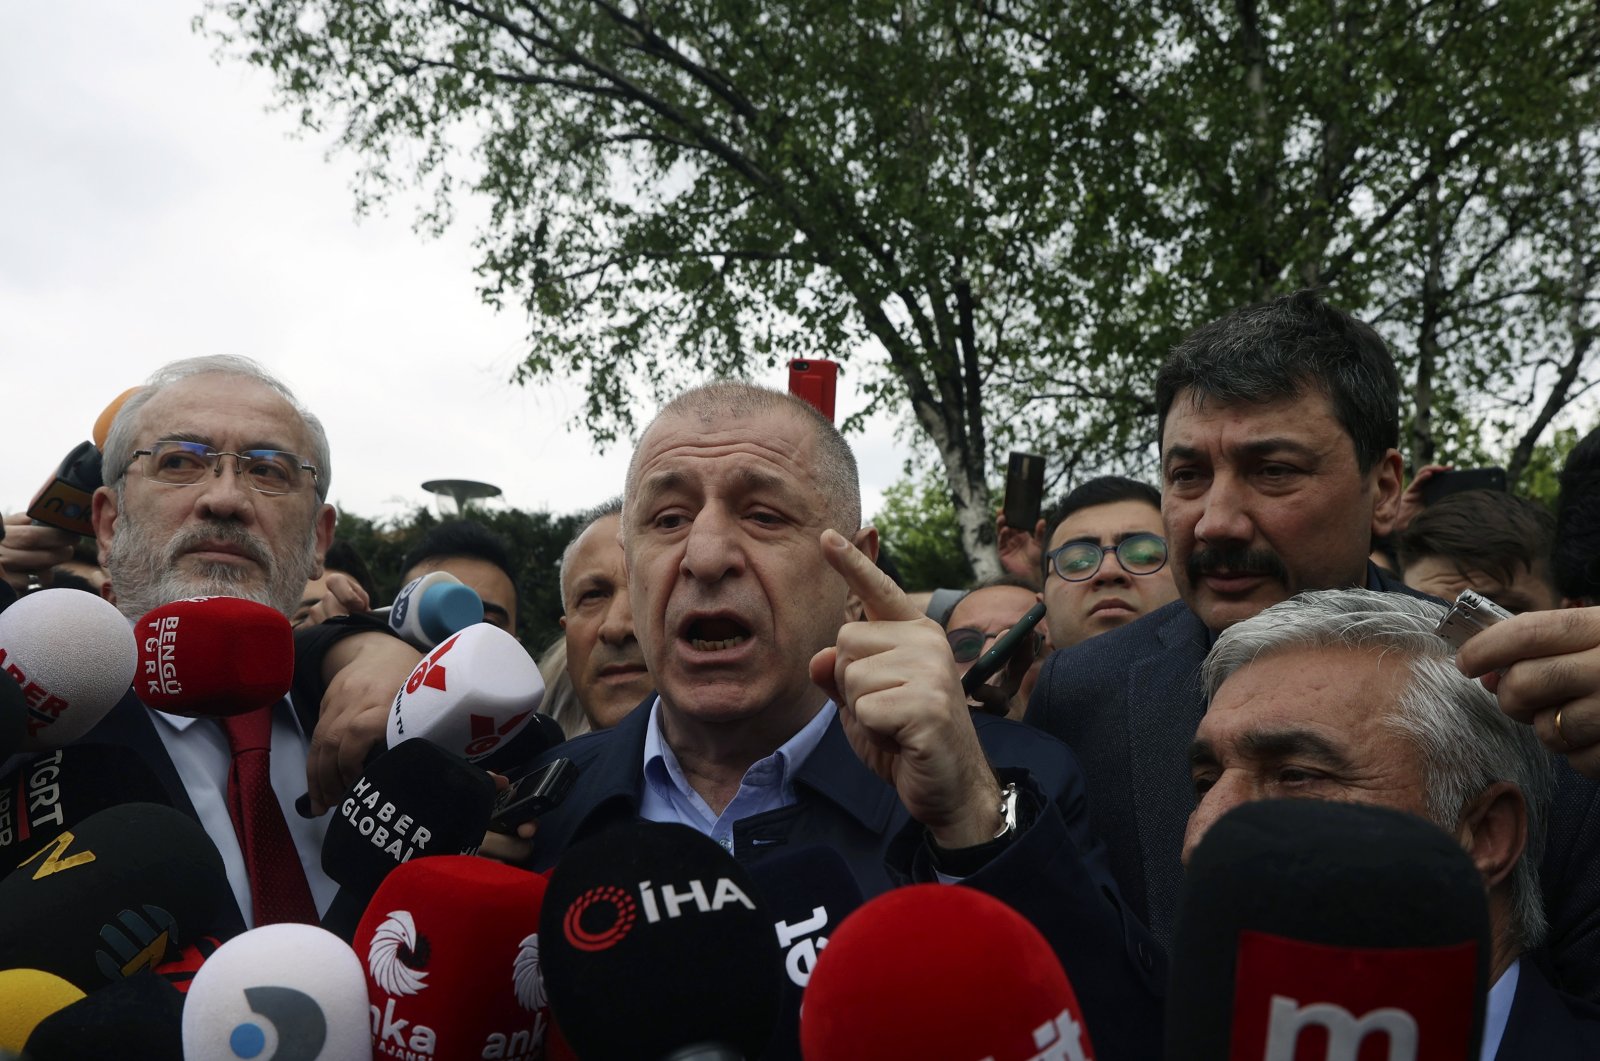 Ümit Özdağ, the leader of the far-right Victory Party, speaks to the media before police blocked his attempt to march to the Interior Ministry to confront Interior Minister Süleyman Soylu, in Ankara, Turkey, May 6, 2022. (AP Photo)